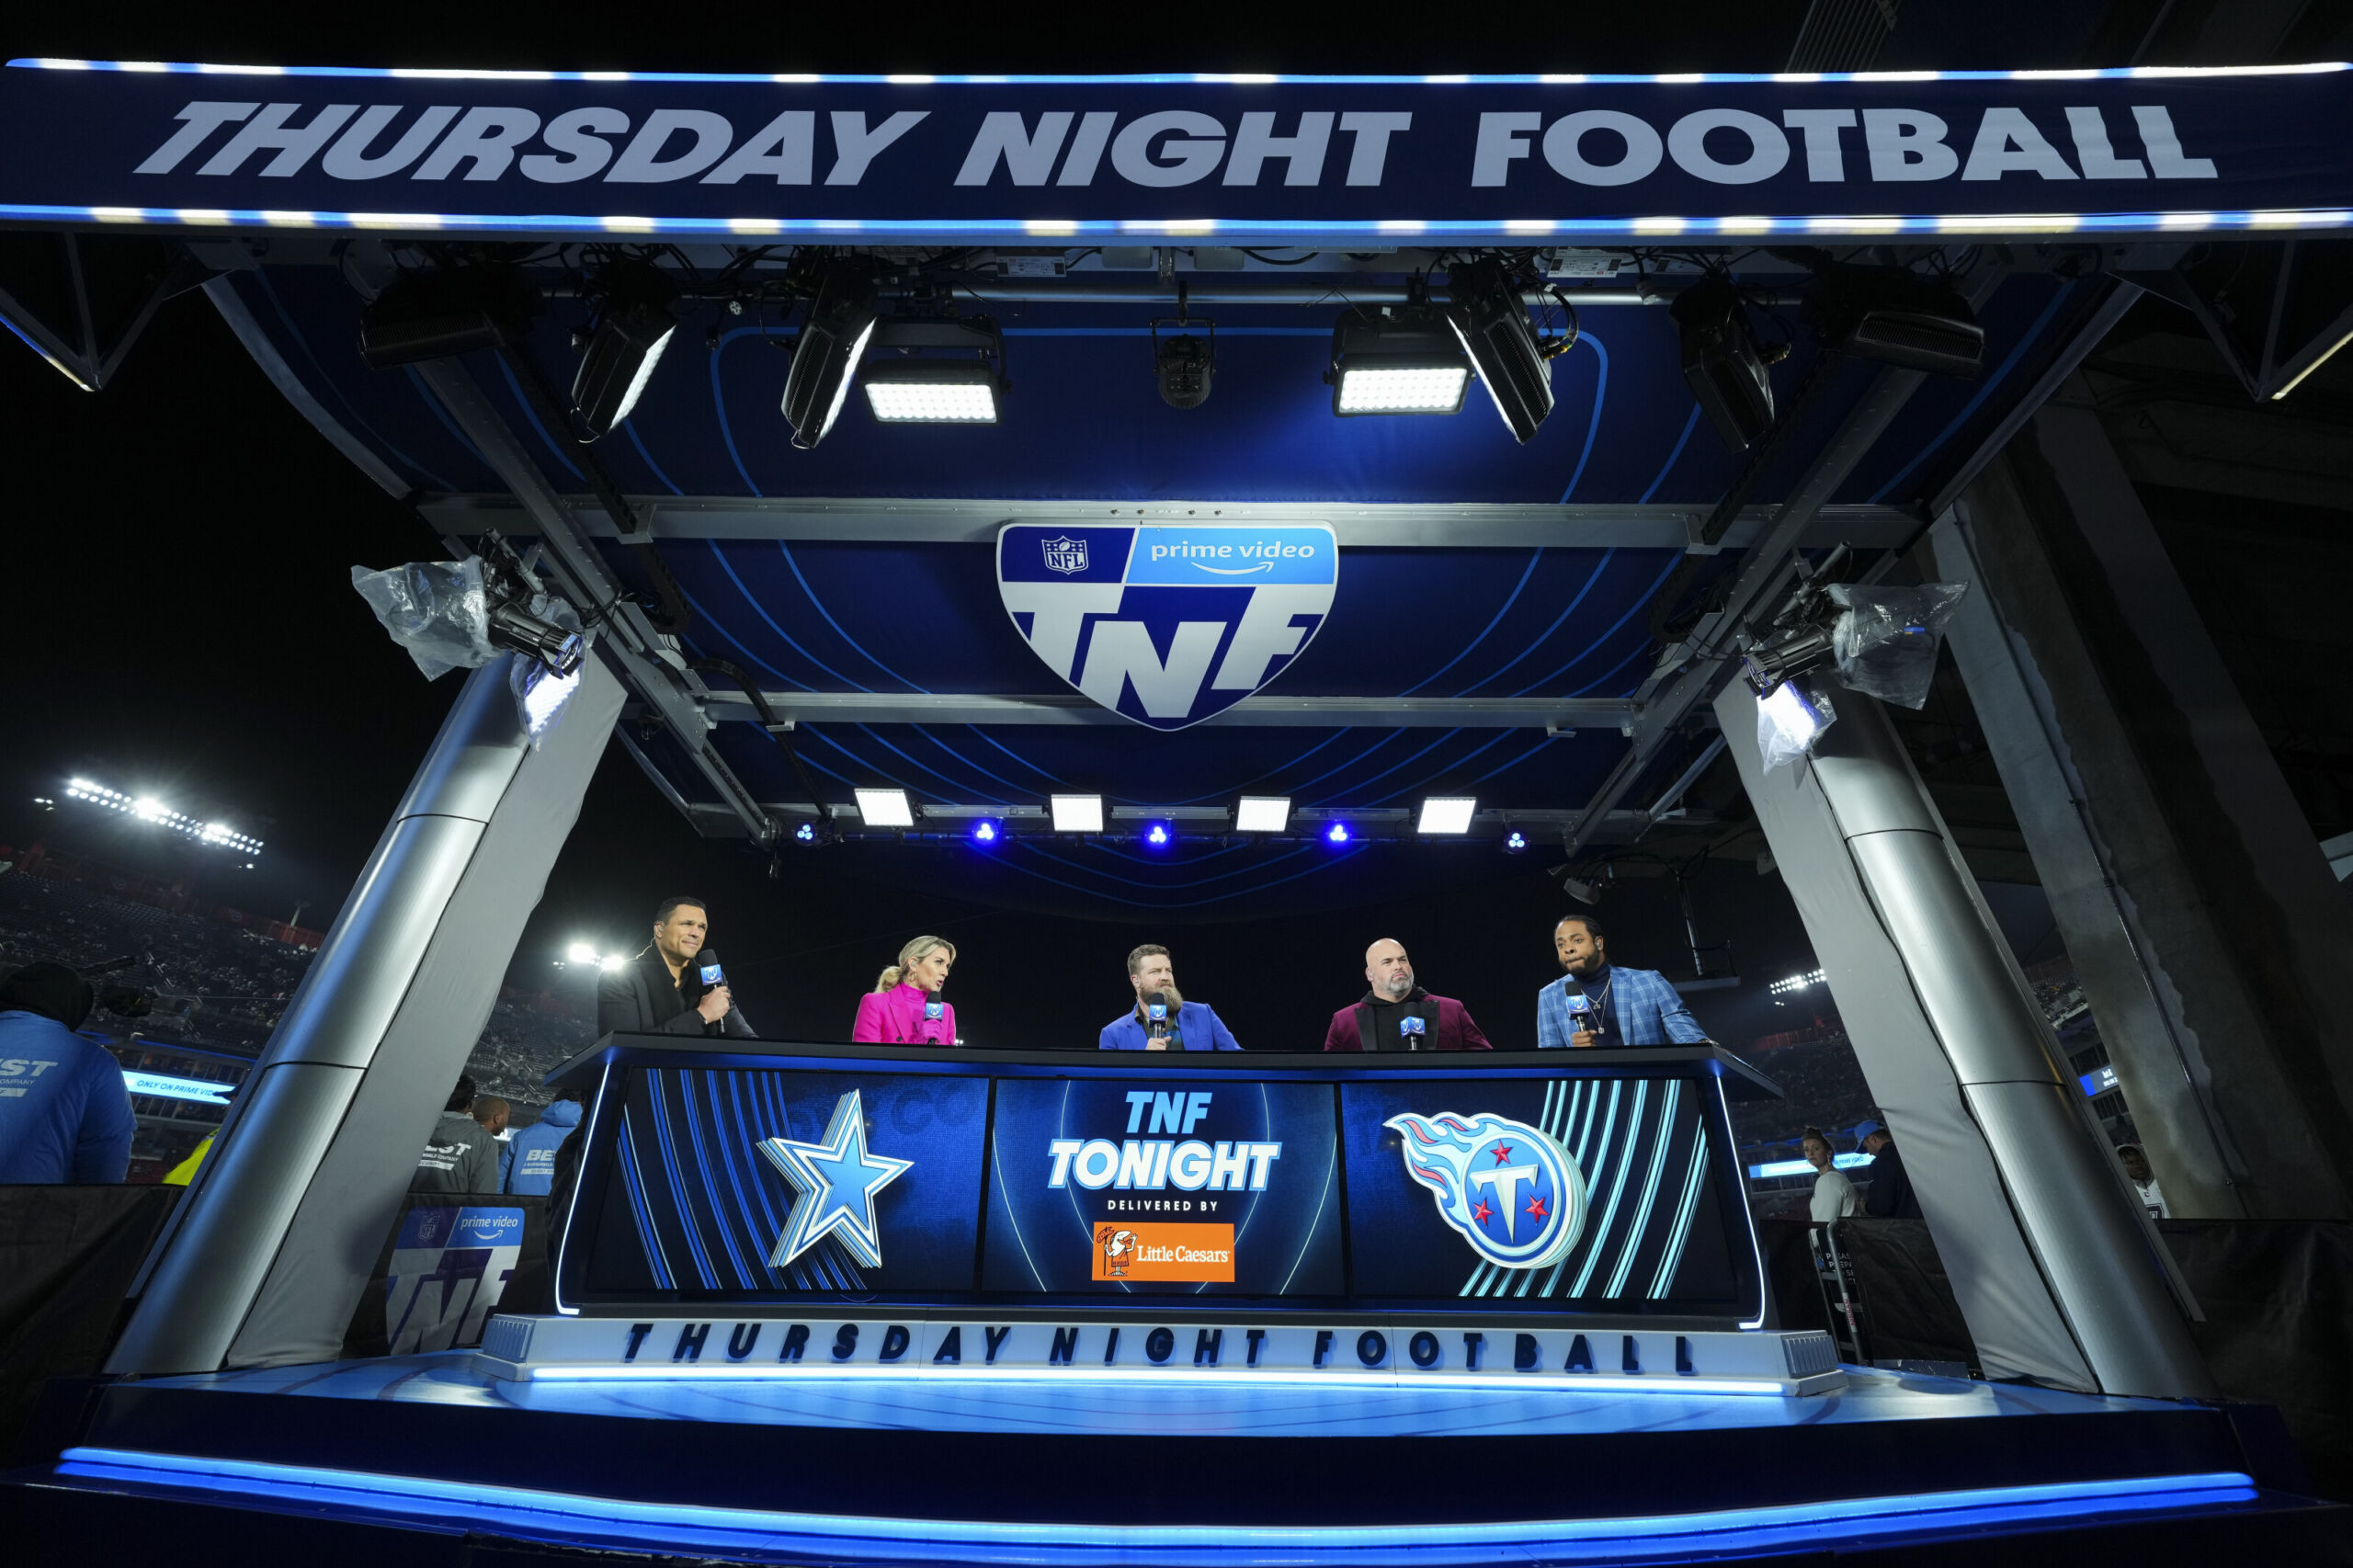 what is the thursday night football game tonight